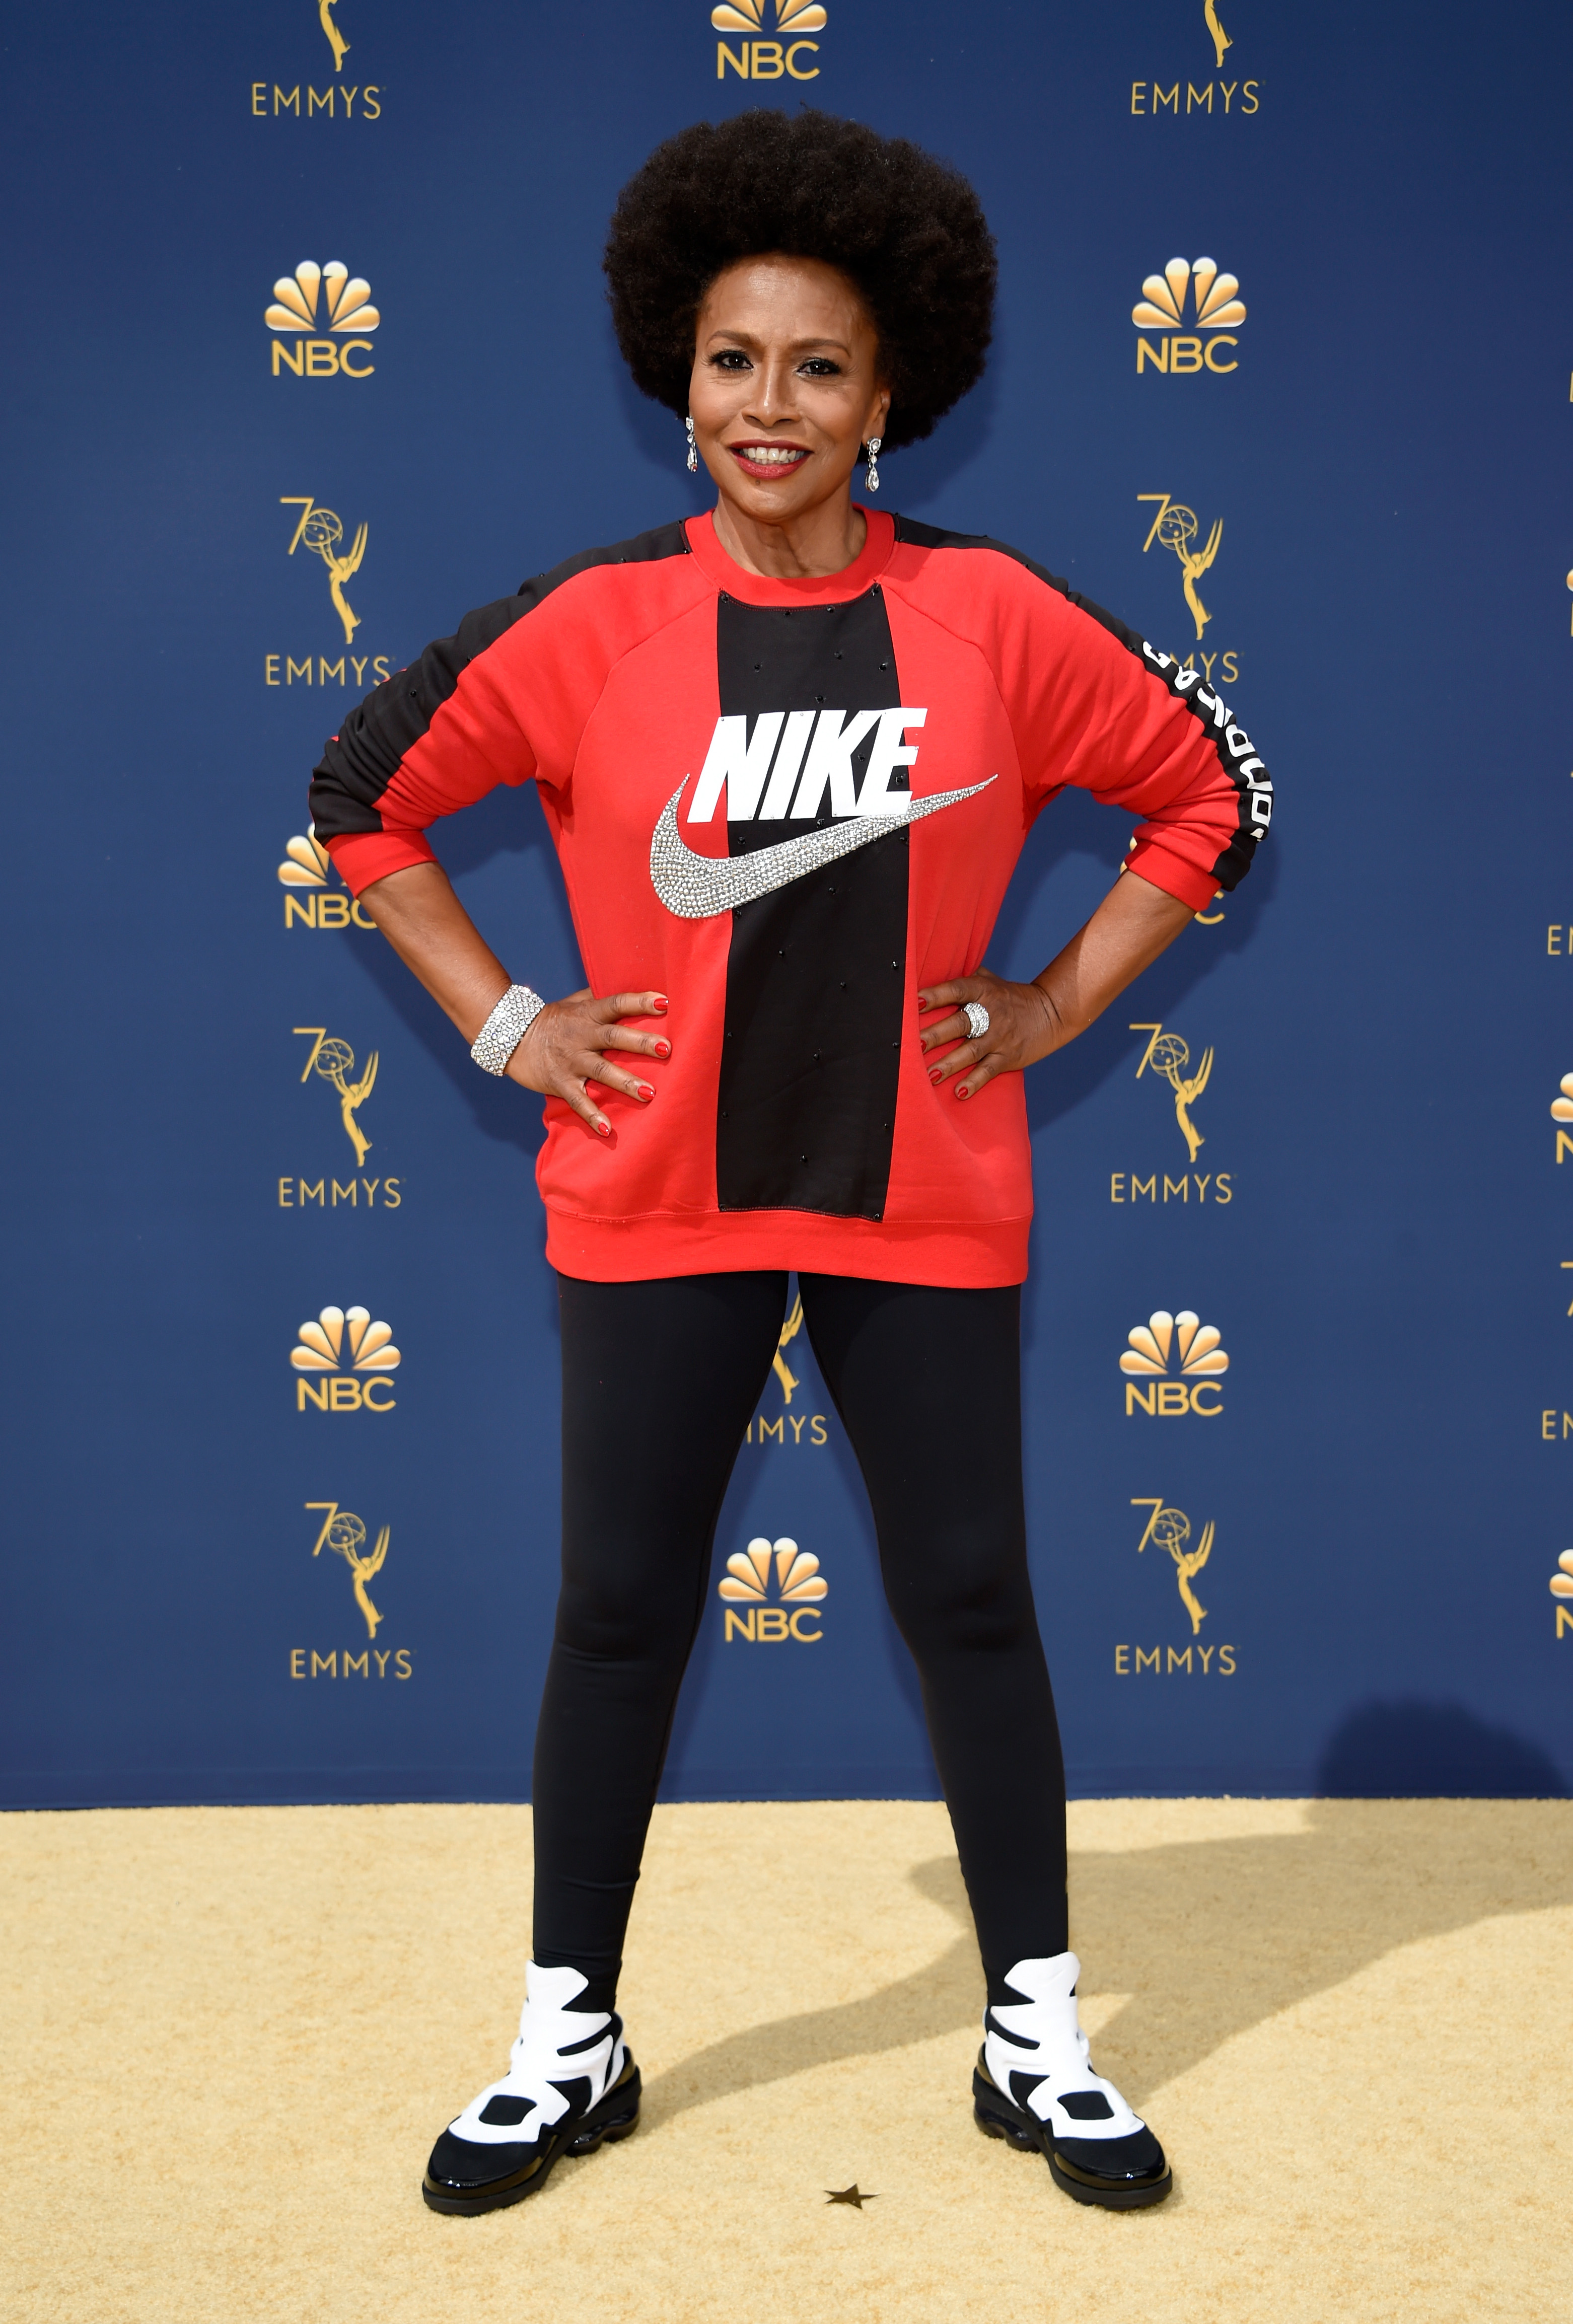 Jenifer Lewis attends the 70th Emmy Awards at Microsoft Theater on September 17, 2018 in Los Angeles, California. (Kevin Mazur—Getty Images)